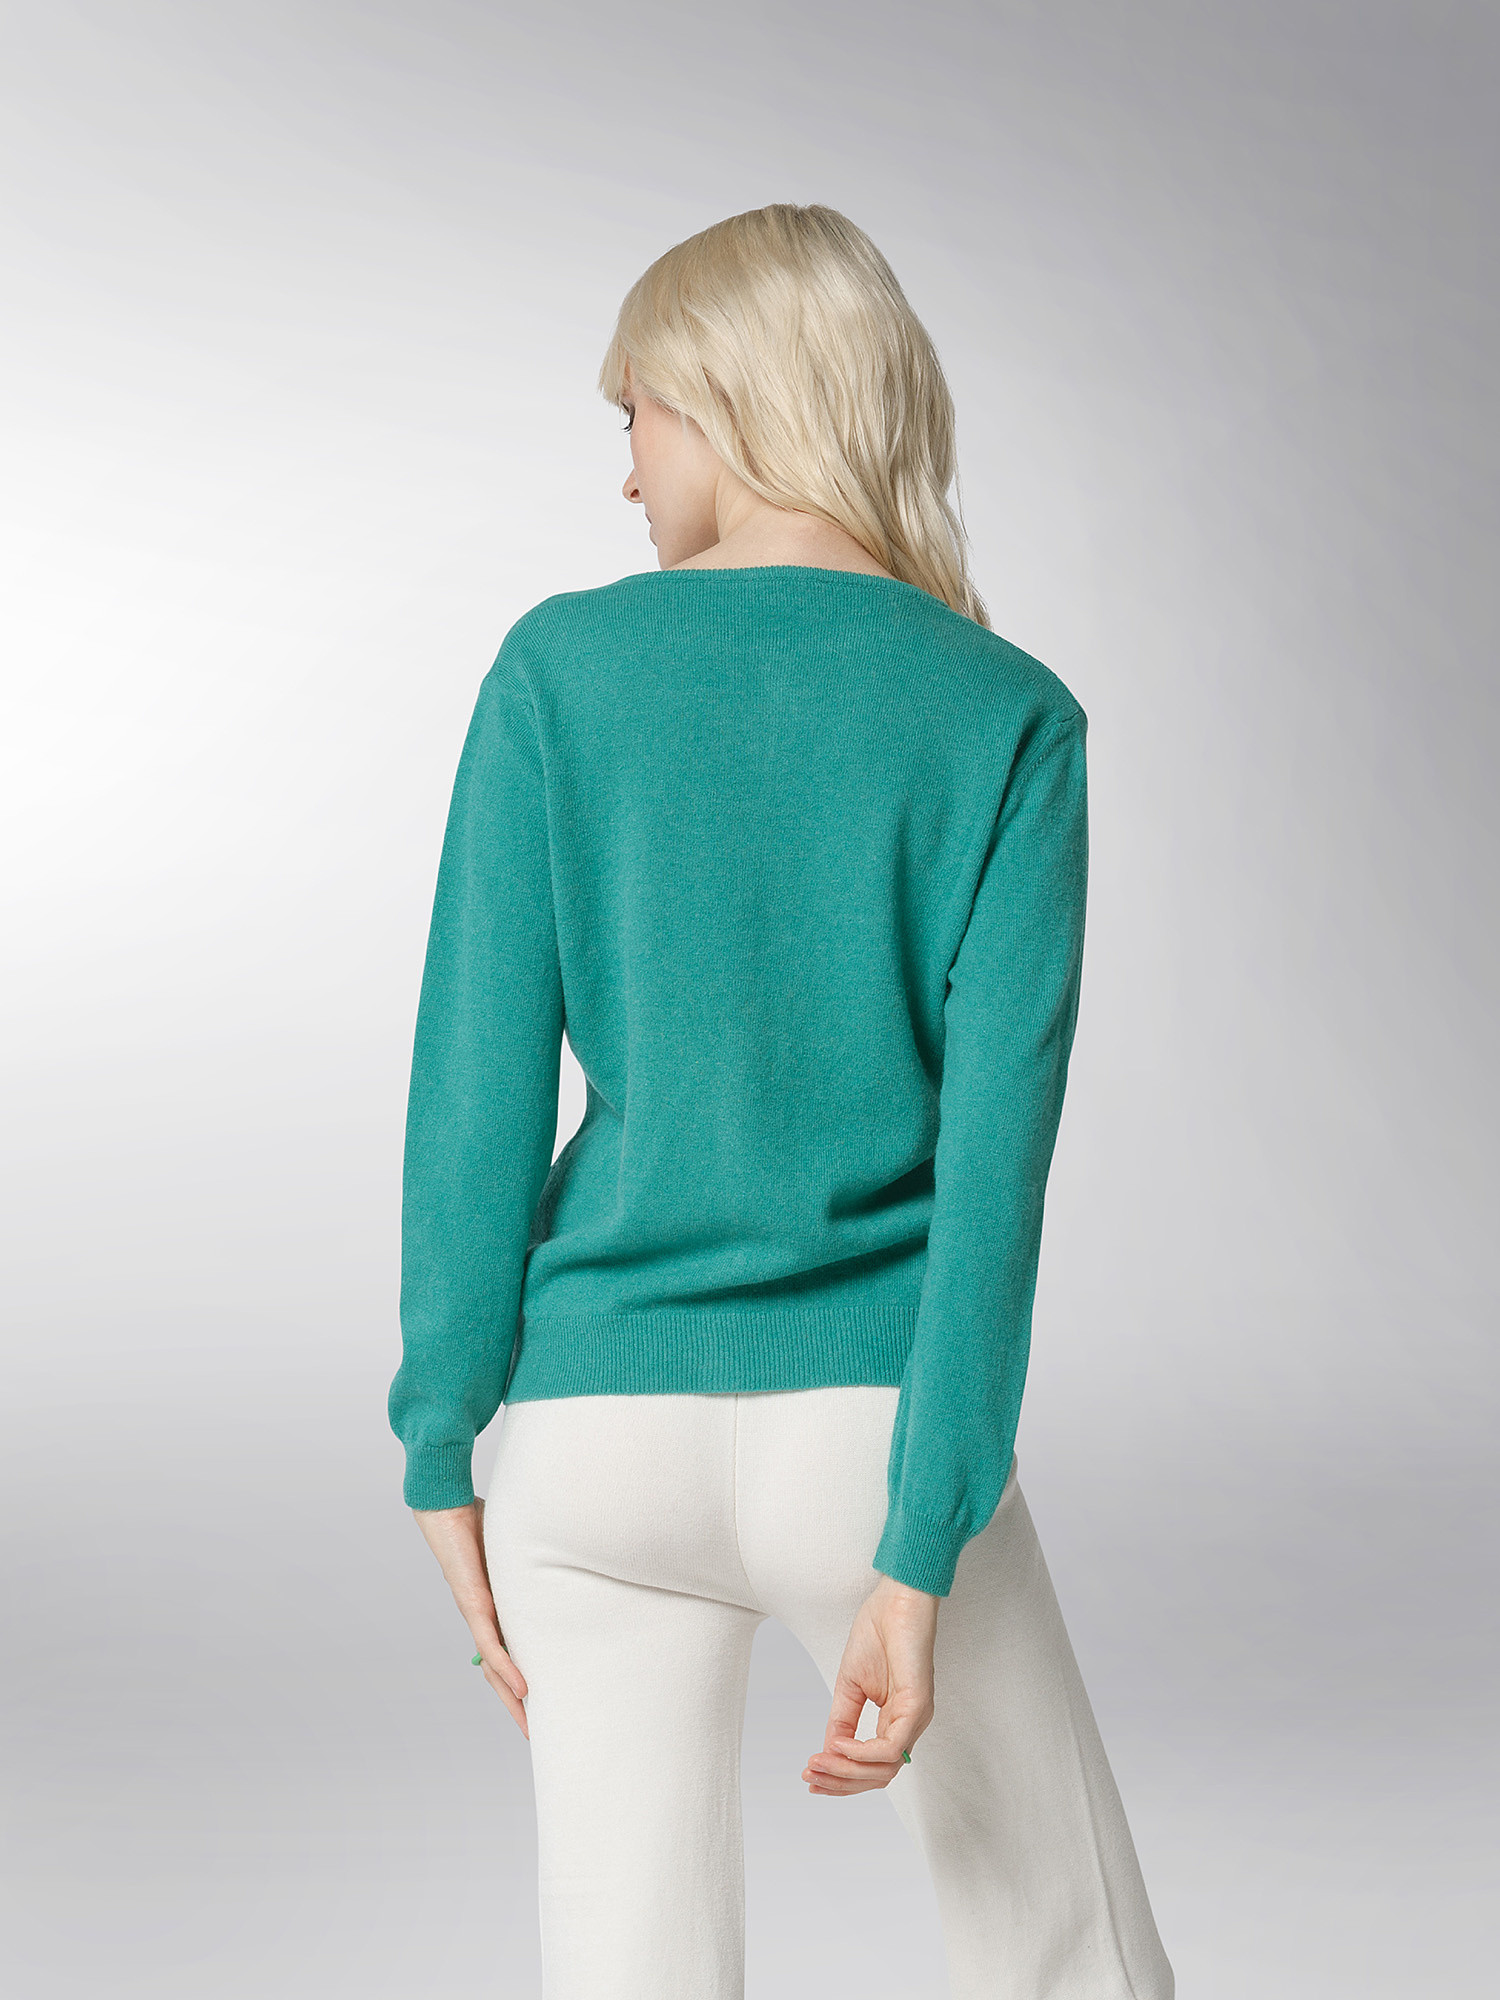 K Collection - Cardigan, Emerald, large image number 5